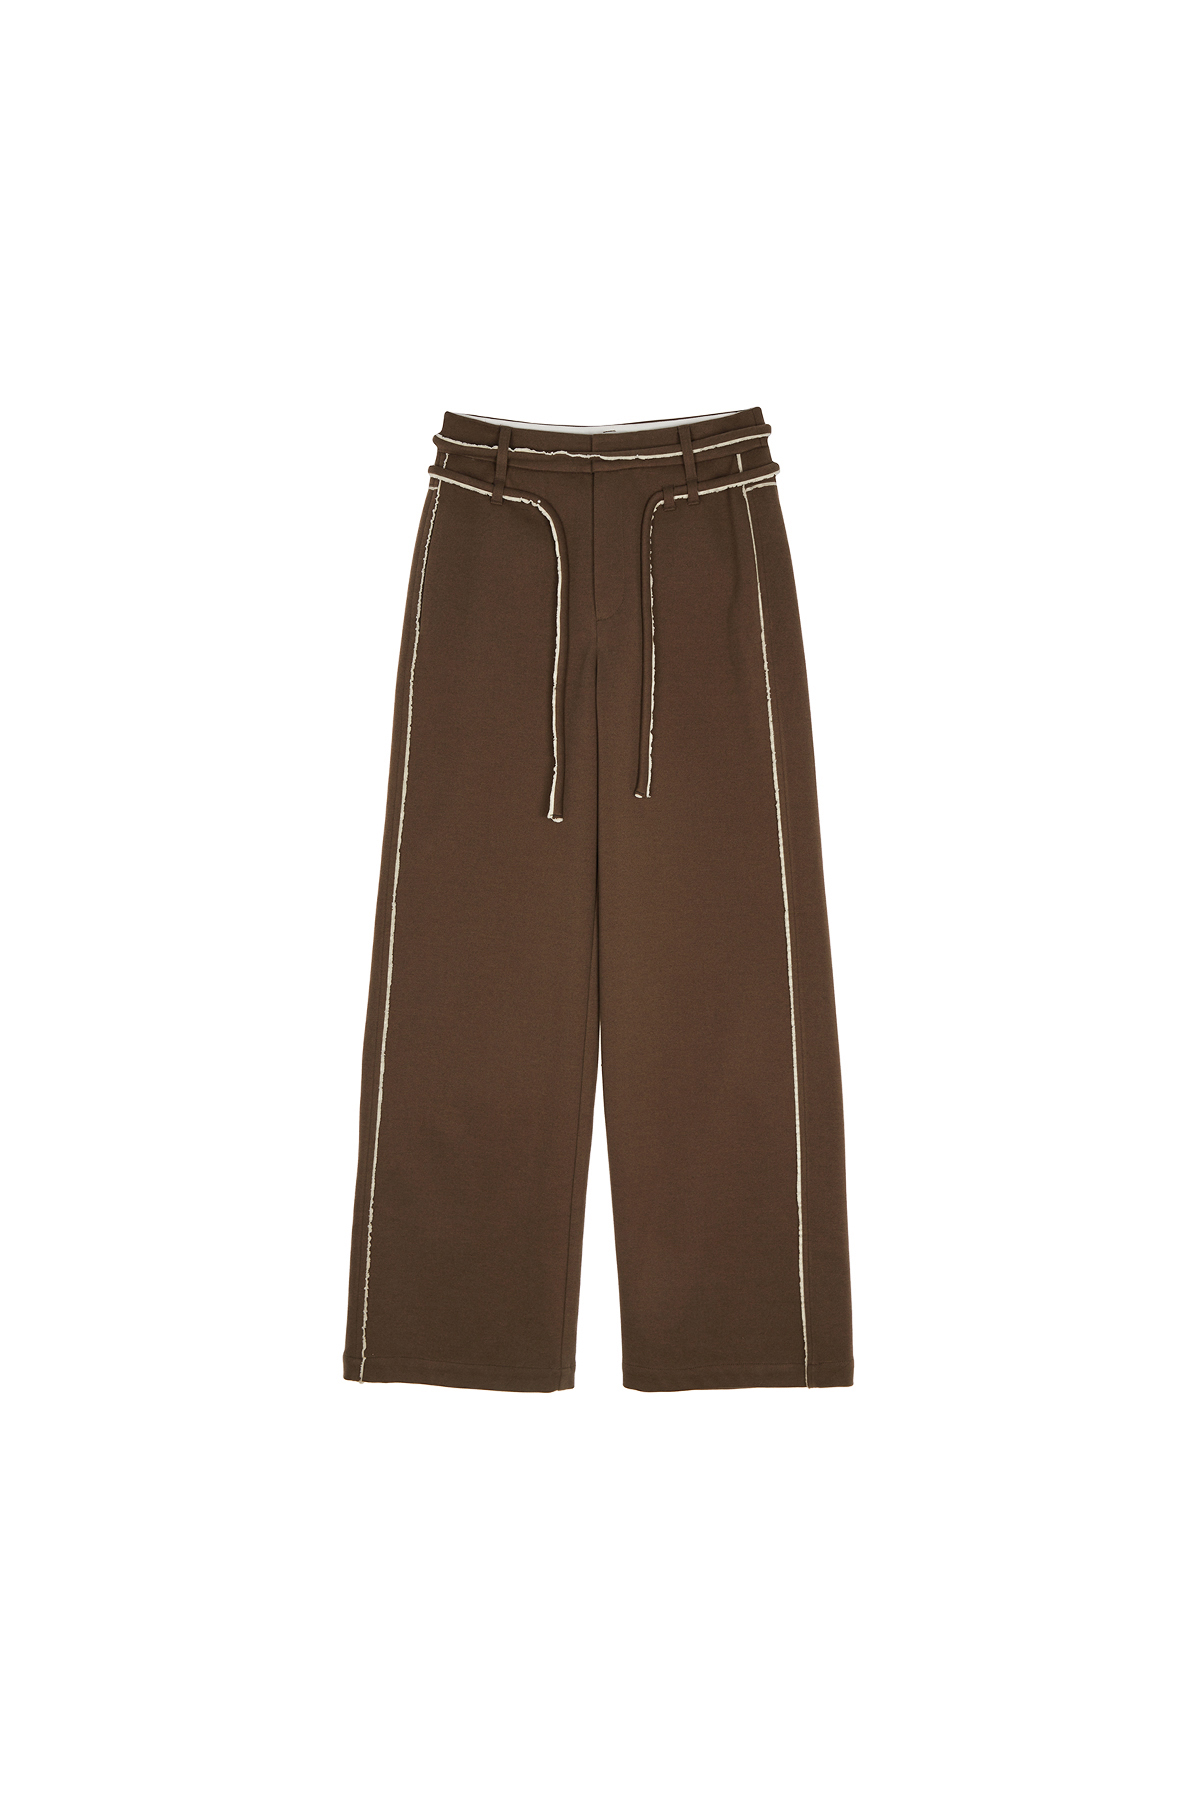 STRING CUT OFF TROUSER IN BROWN